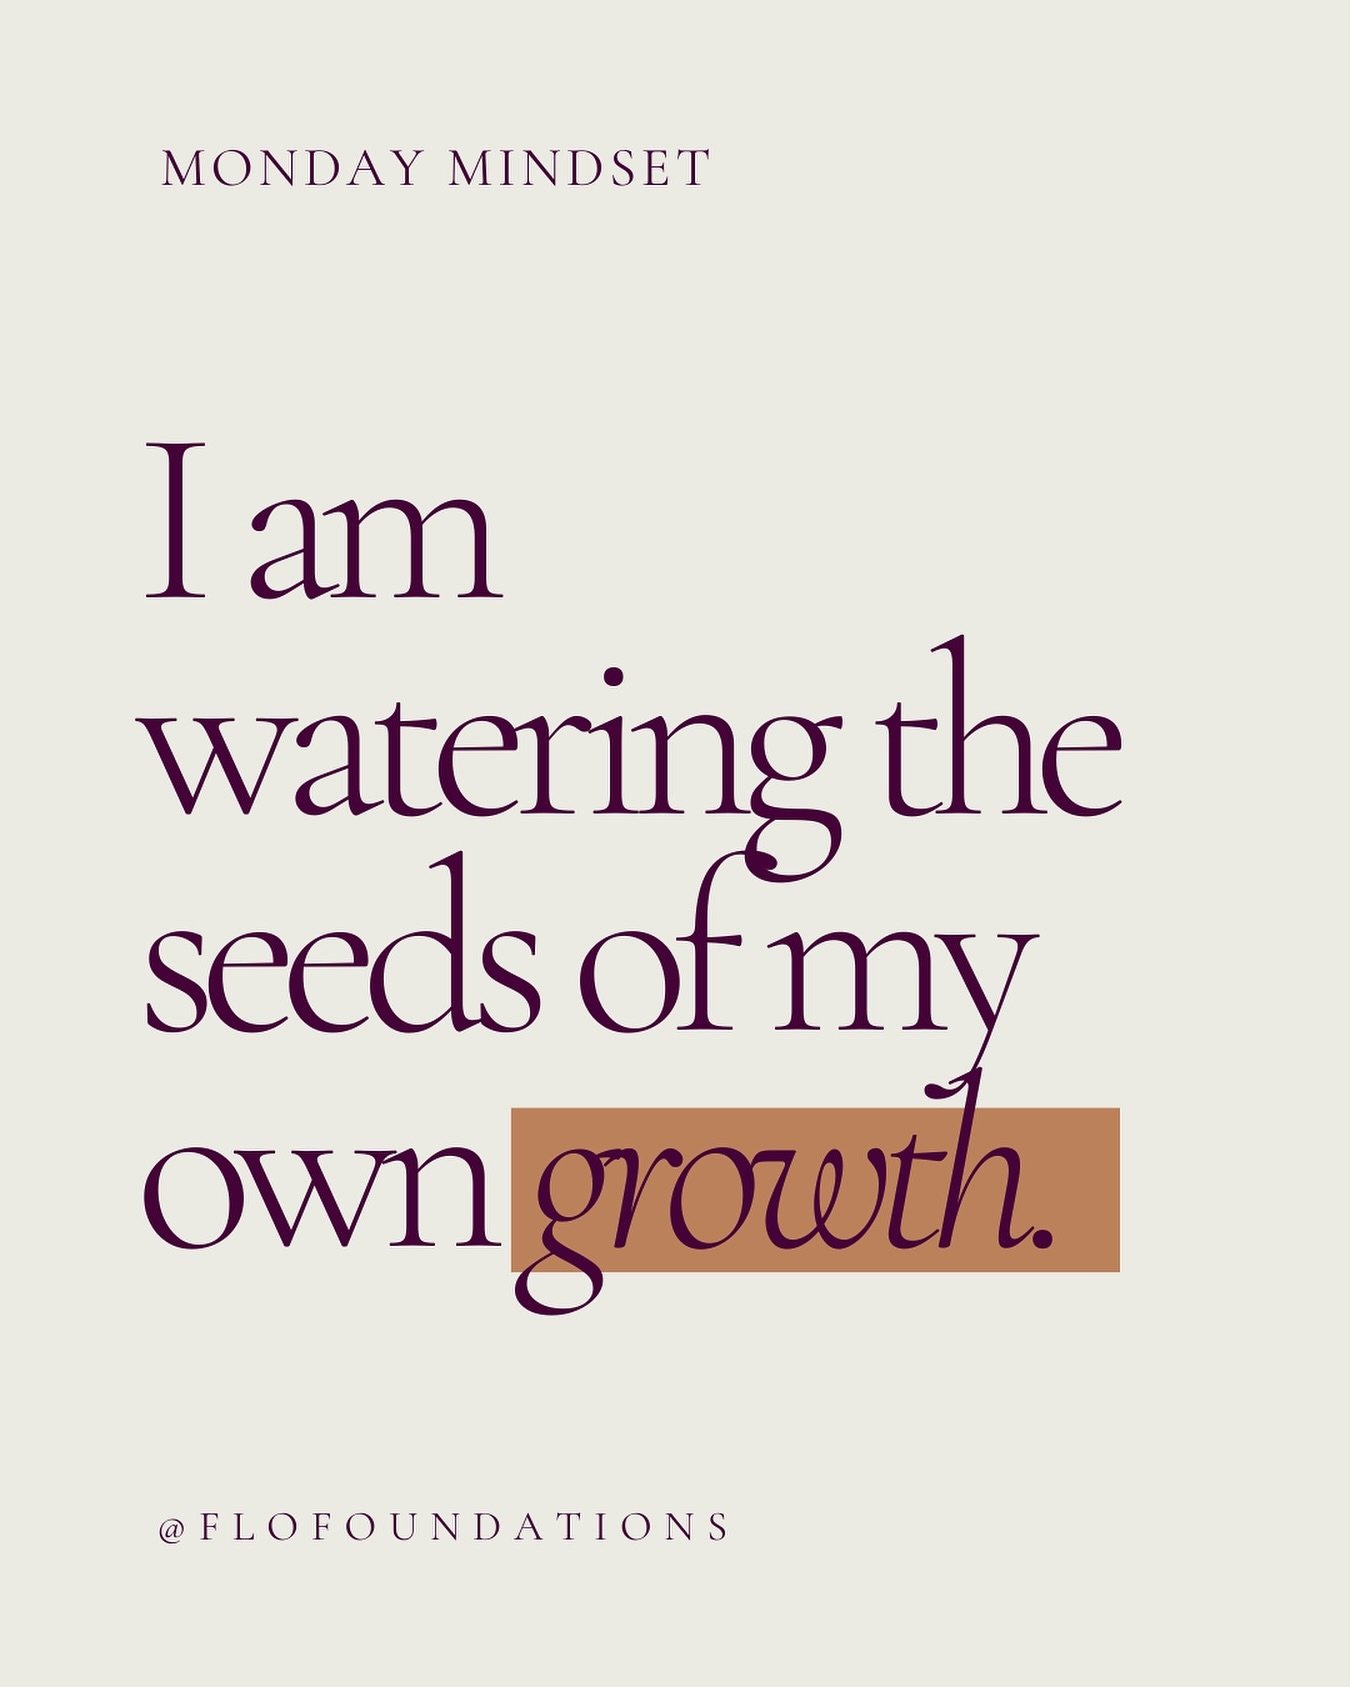 What we water, grows 🚿

This is a gentle reminder for all, especially me! 💞

What we water, grows. But personal growth is subject to the same laws of nature as plant growth. 

The are seasons of rain. Season of vibrance. Seasons of rest and recover